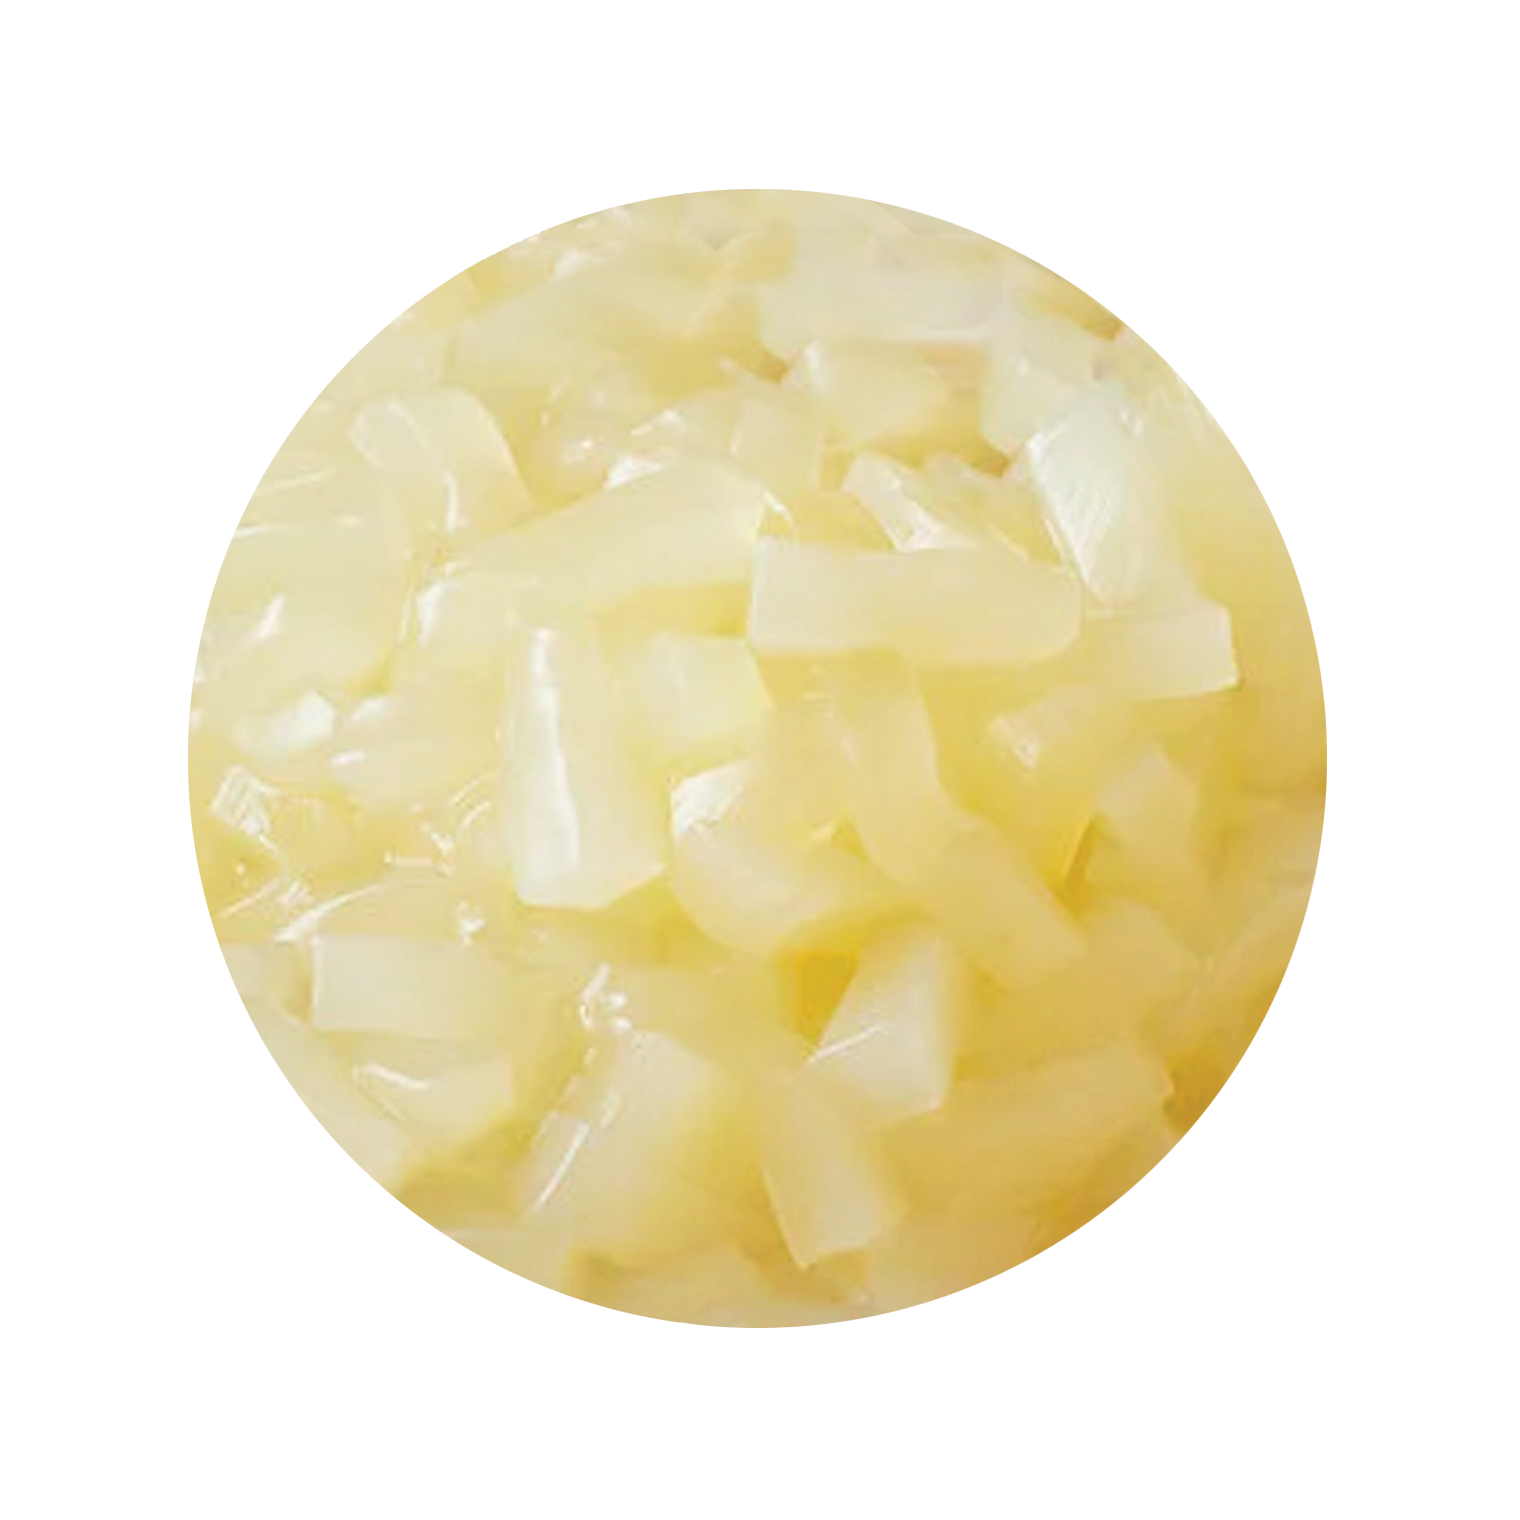 Pineapple Coconut Jelly image